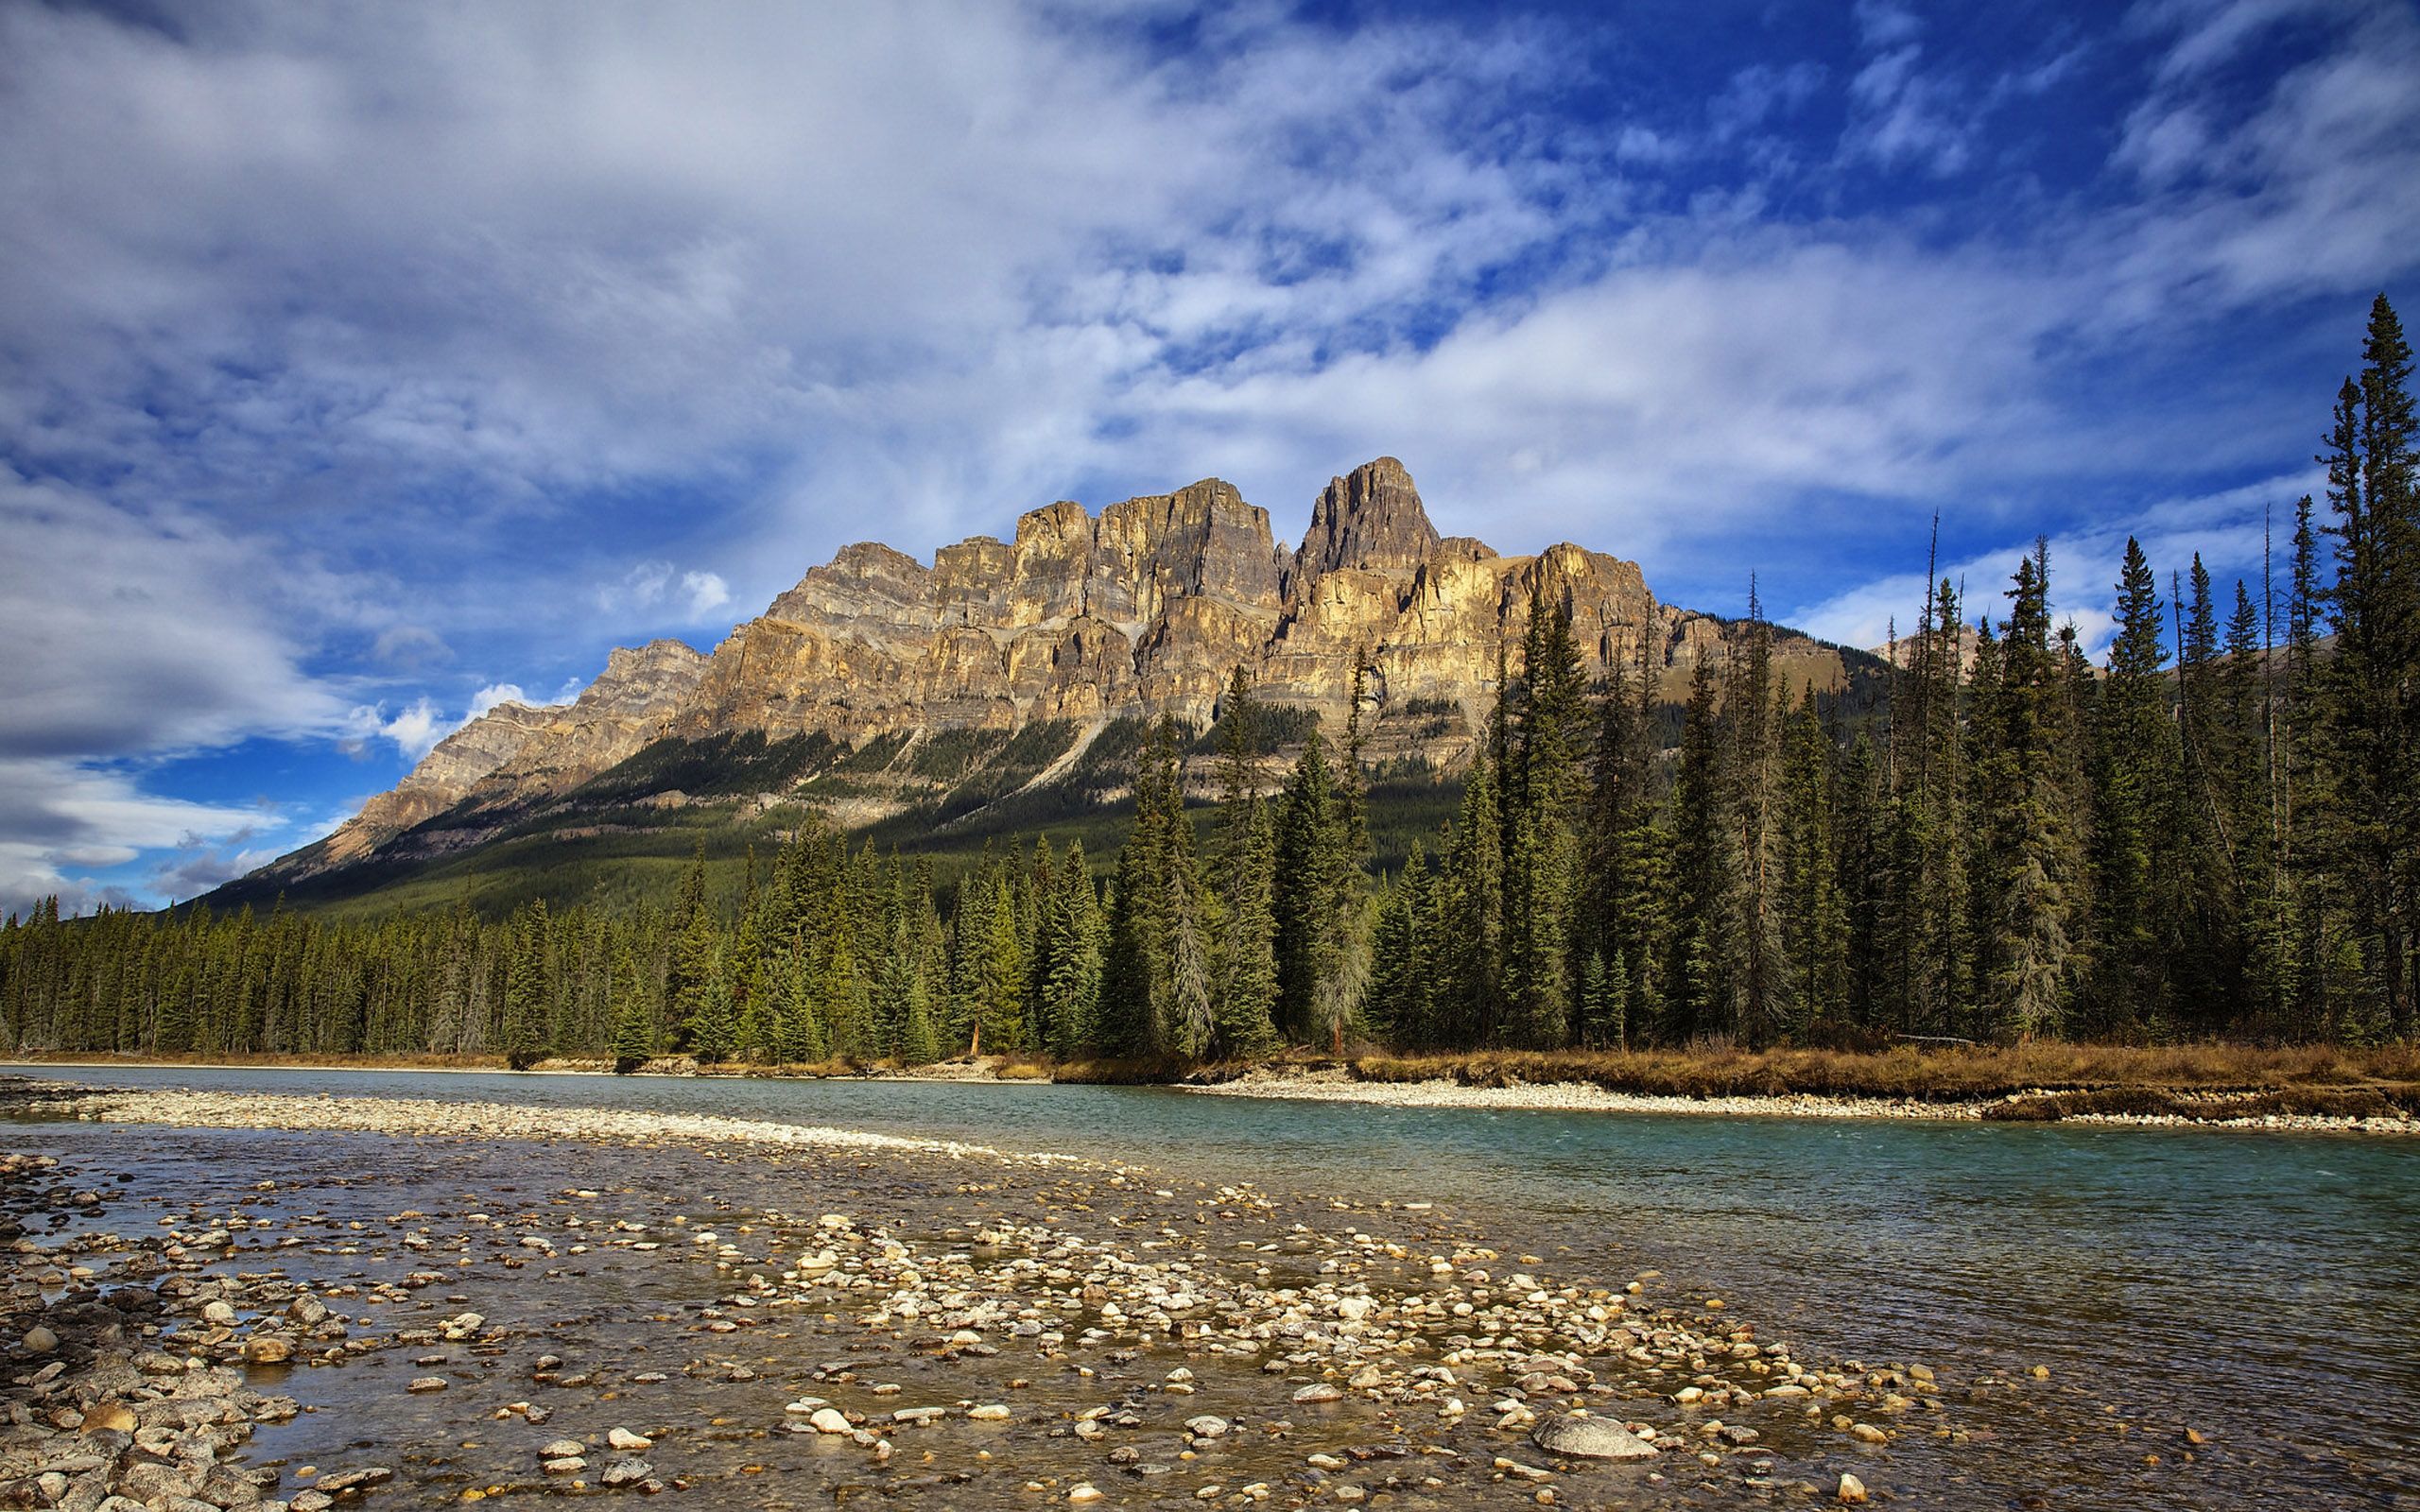 Castle Mountain Is Located In Banff National Park In Canadian Rockies Halfway Between Banff And Lake Louise Landscape Wallpaper HD 2560x1600, Wallpaper13.com